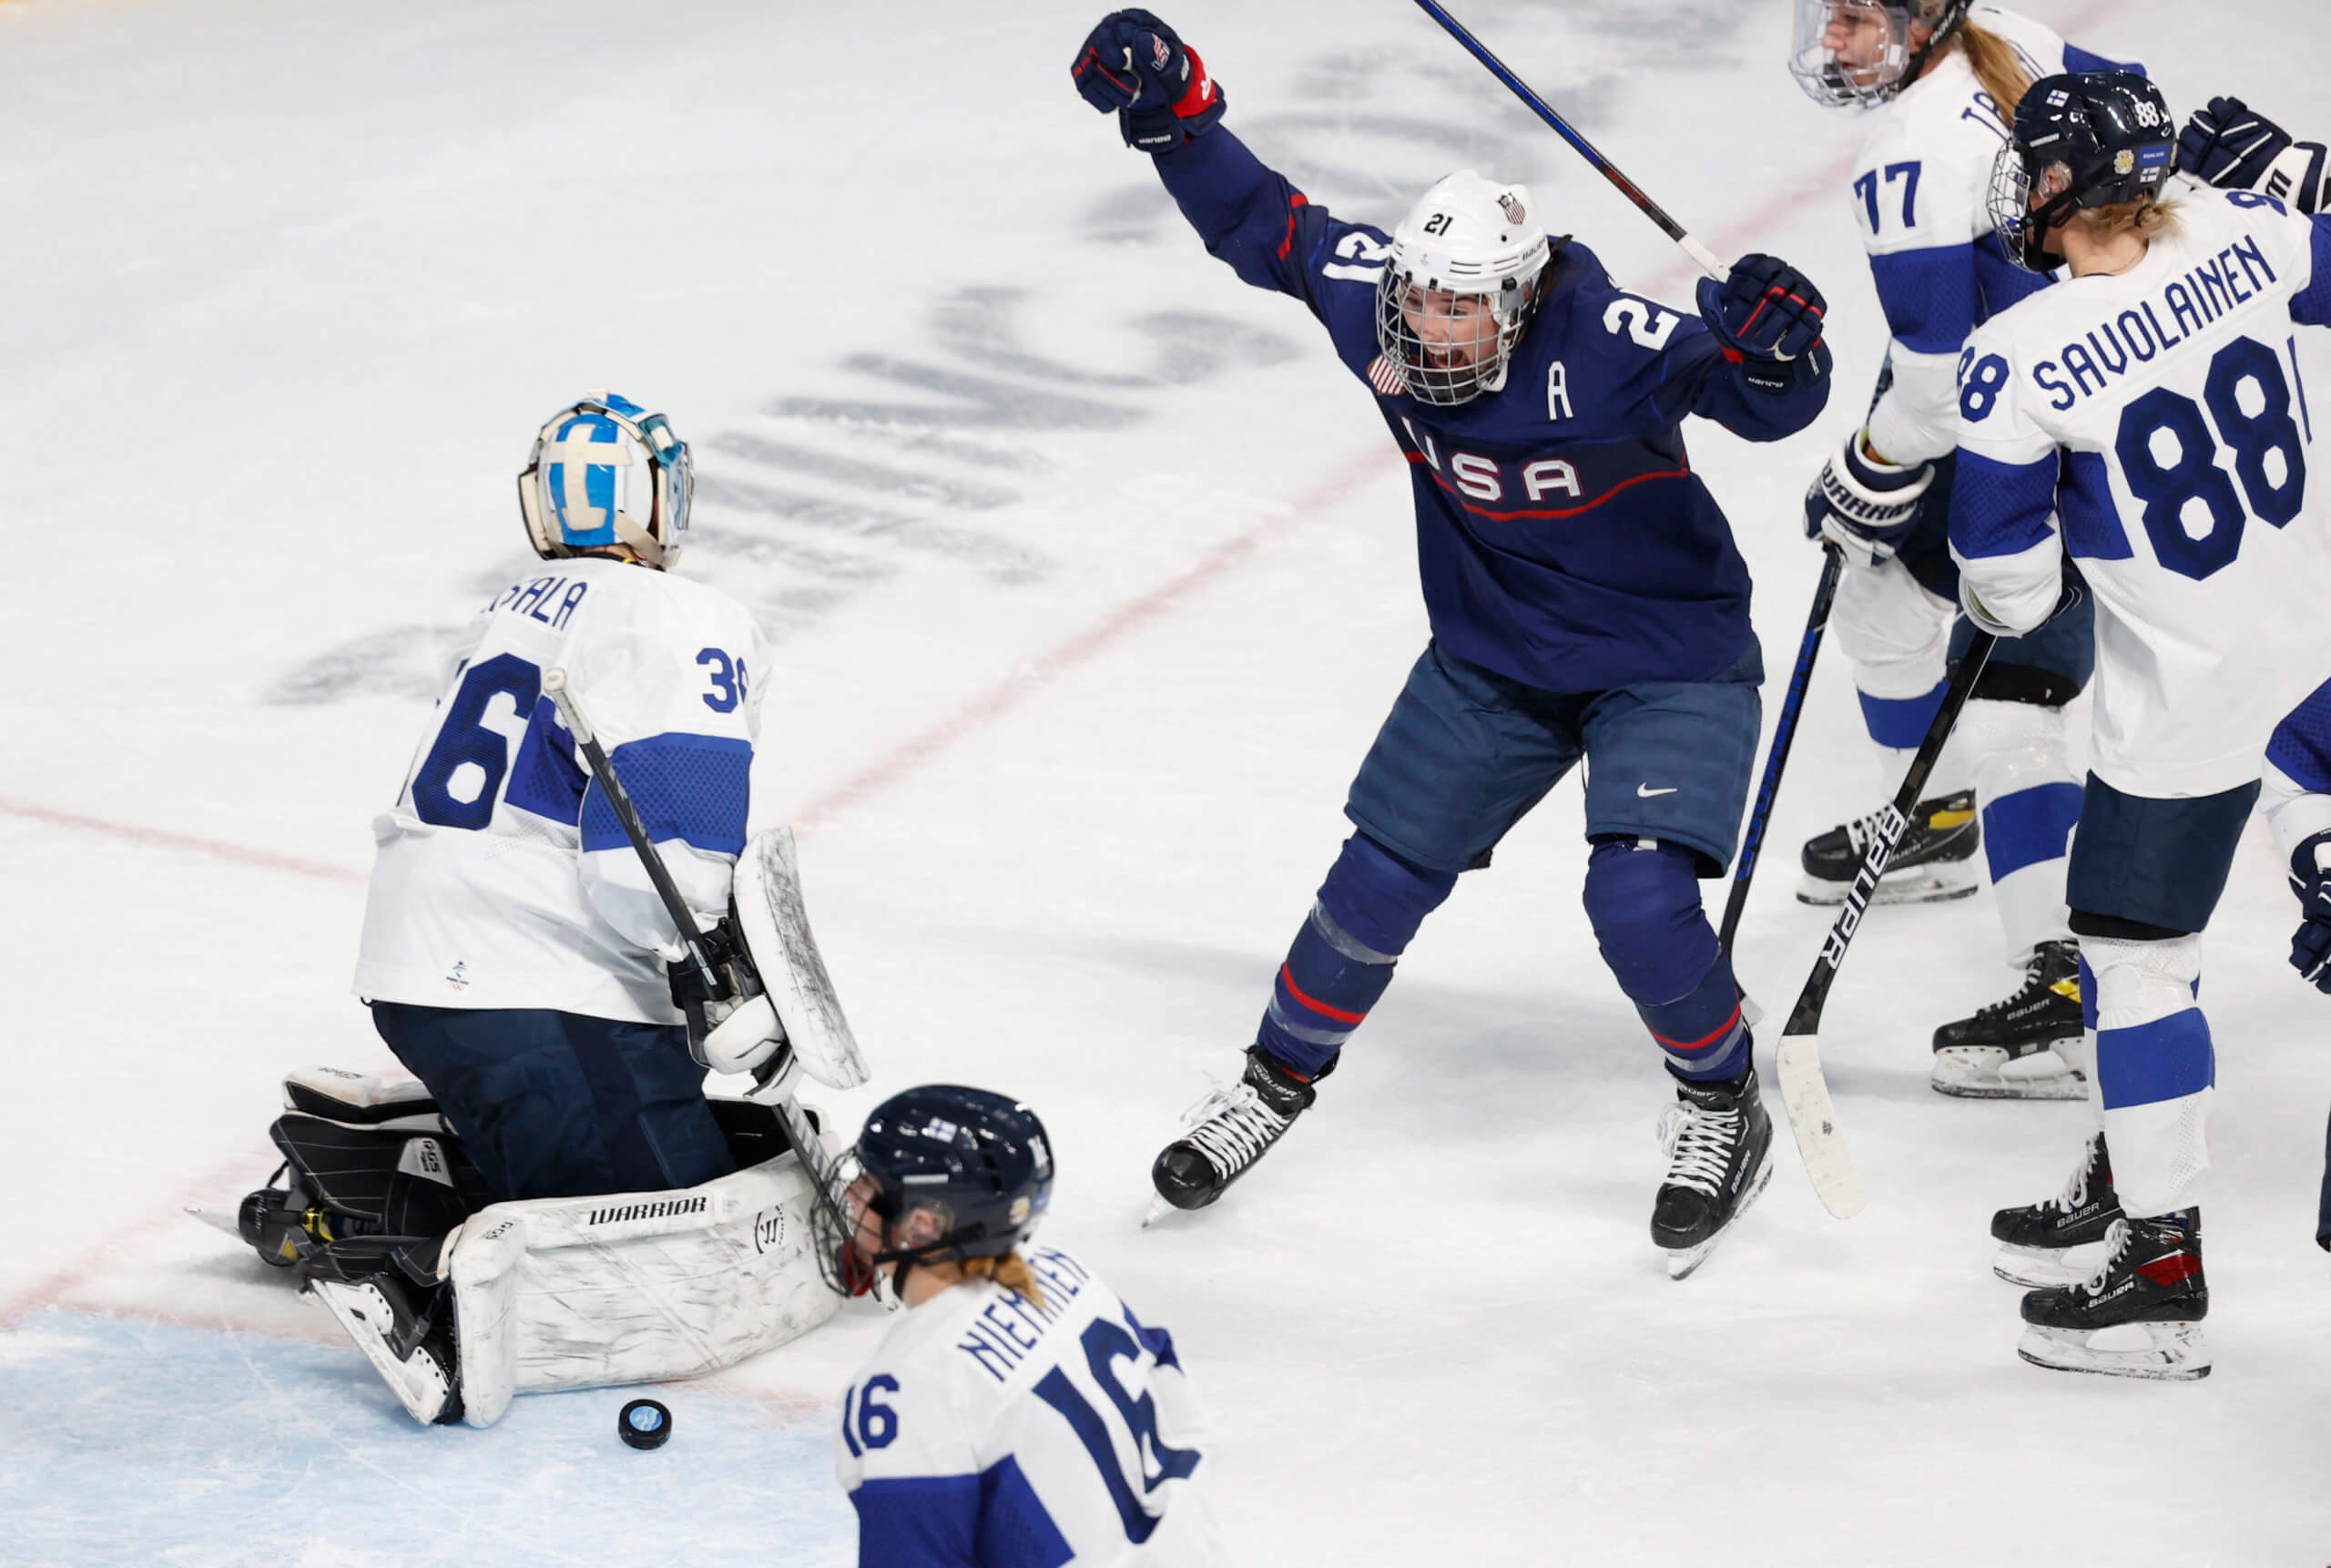 US Women's Hockey off to a strong start in 2022 Winter Olympics